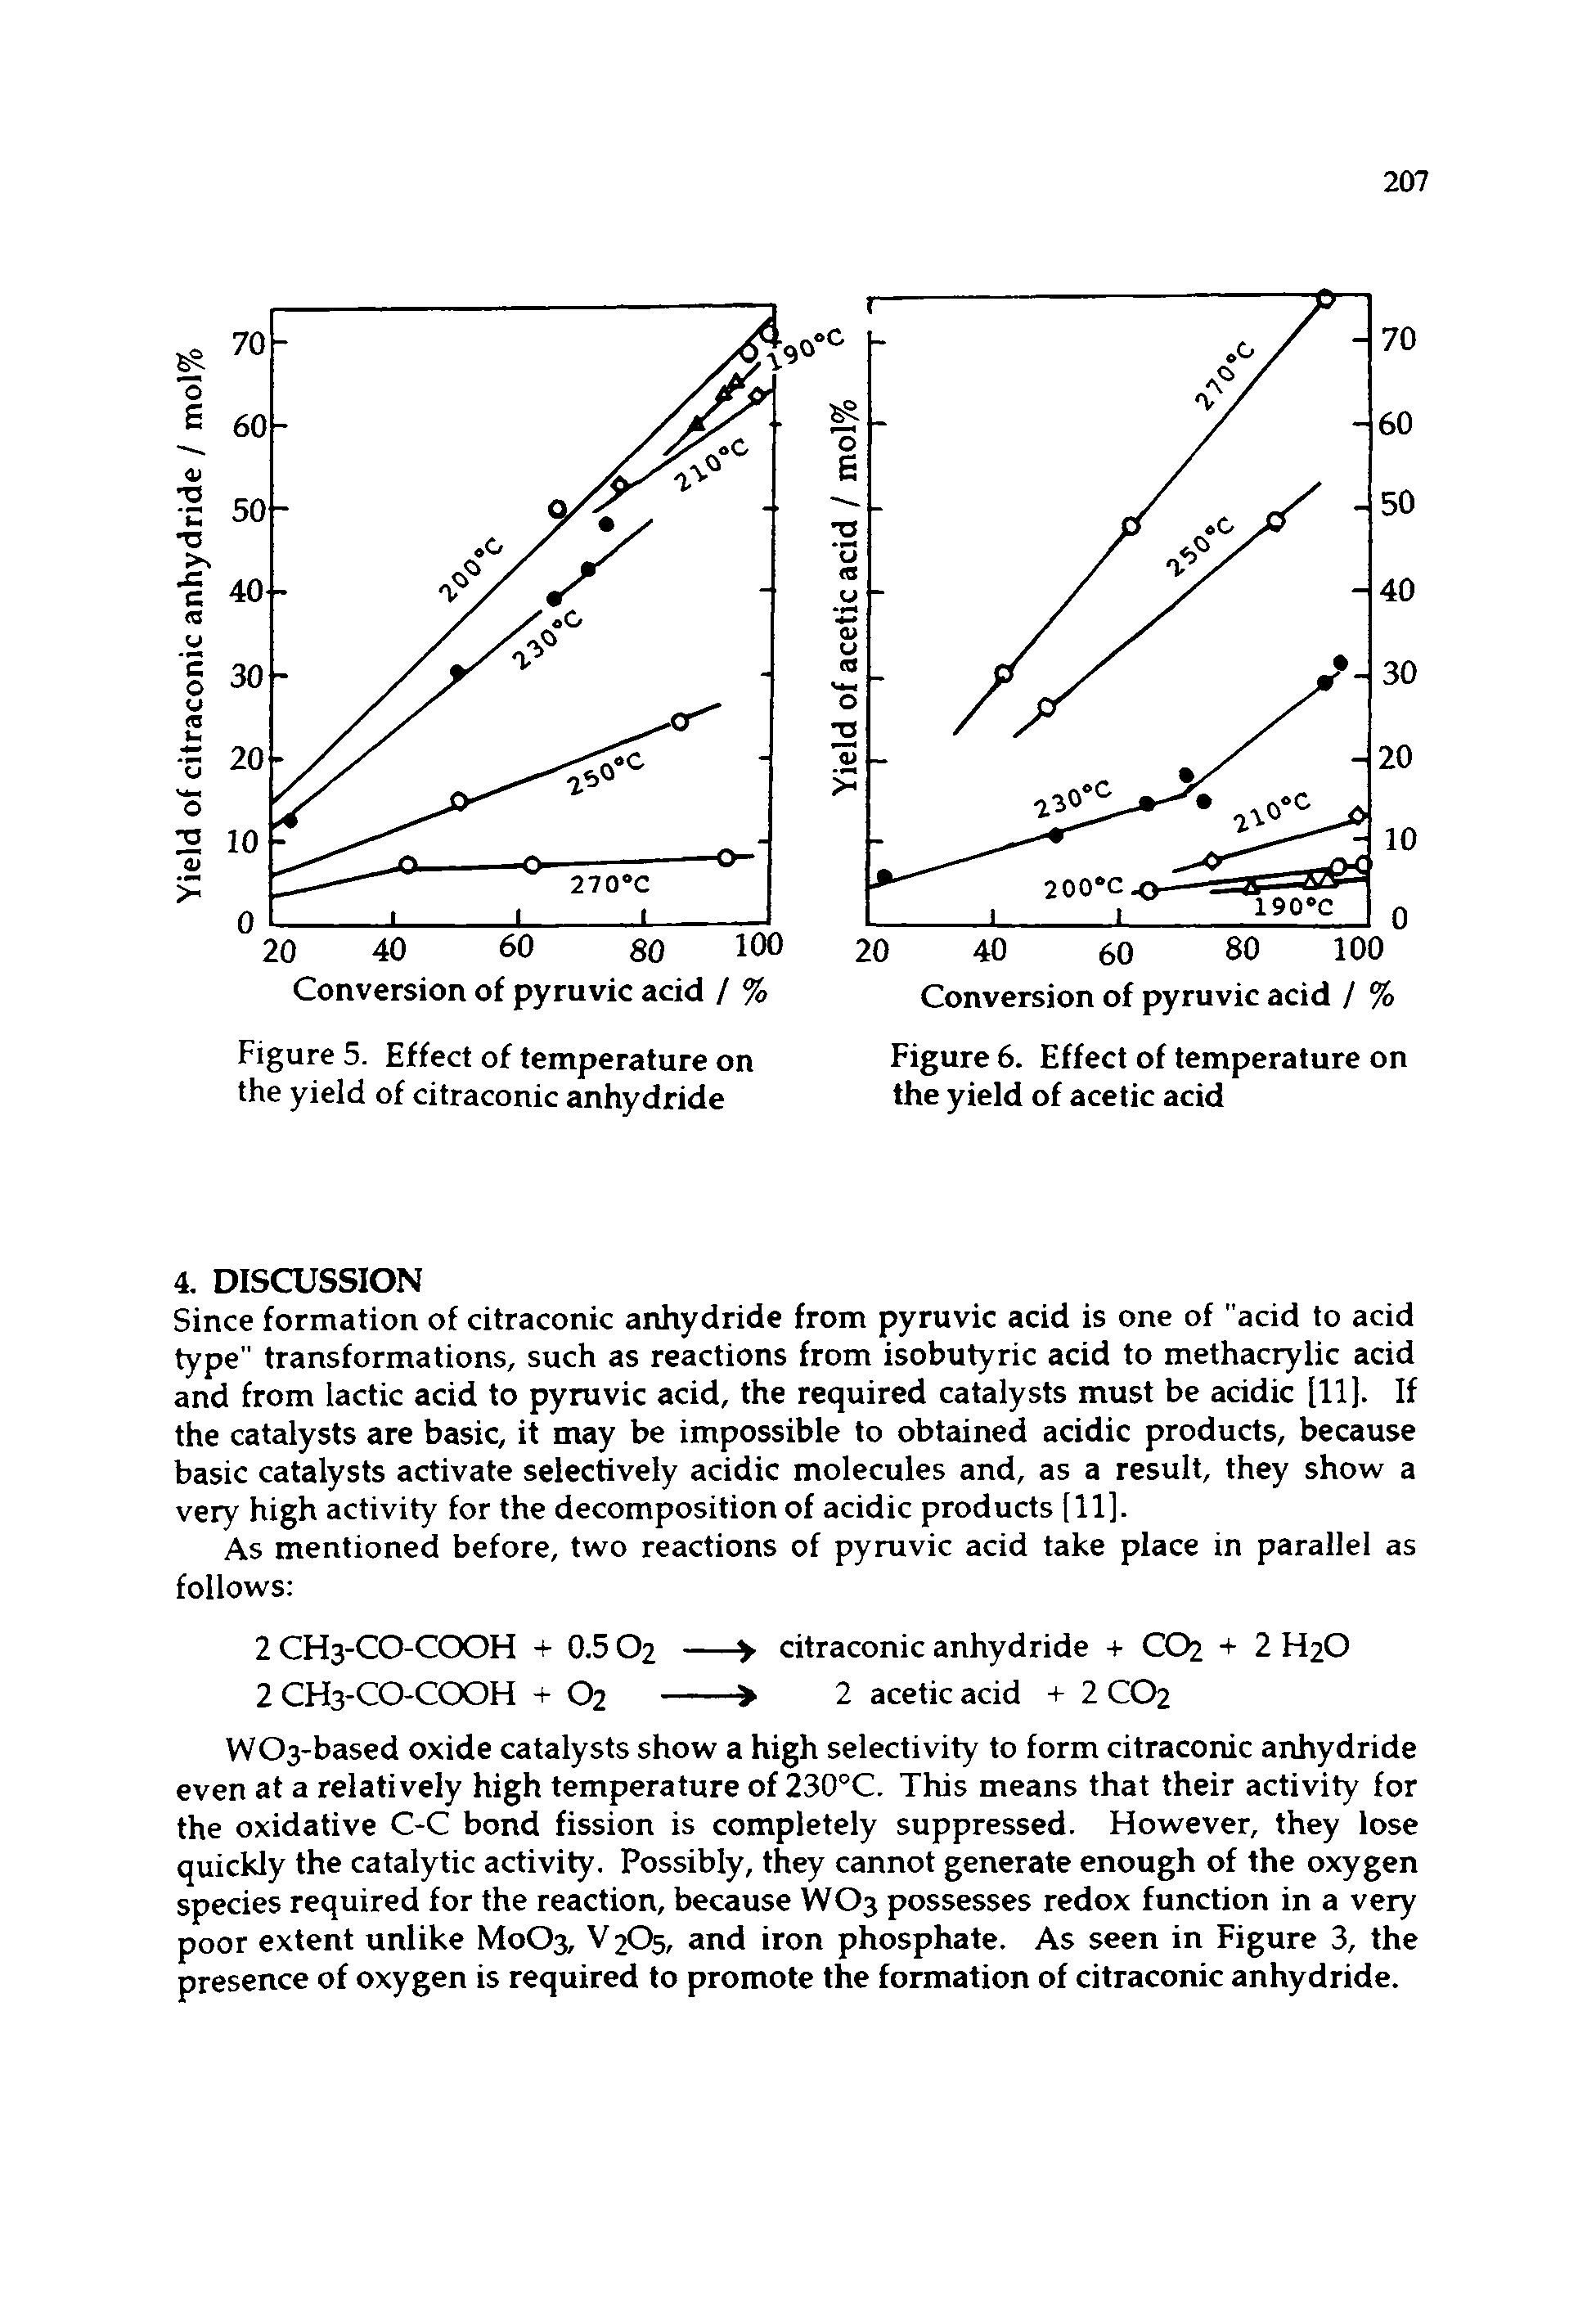 Figure 6. Effect of temperature on the yield of acetic acid...